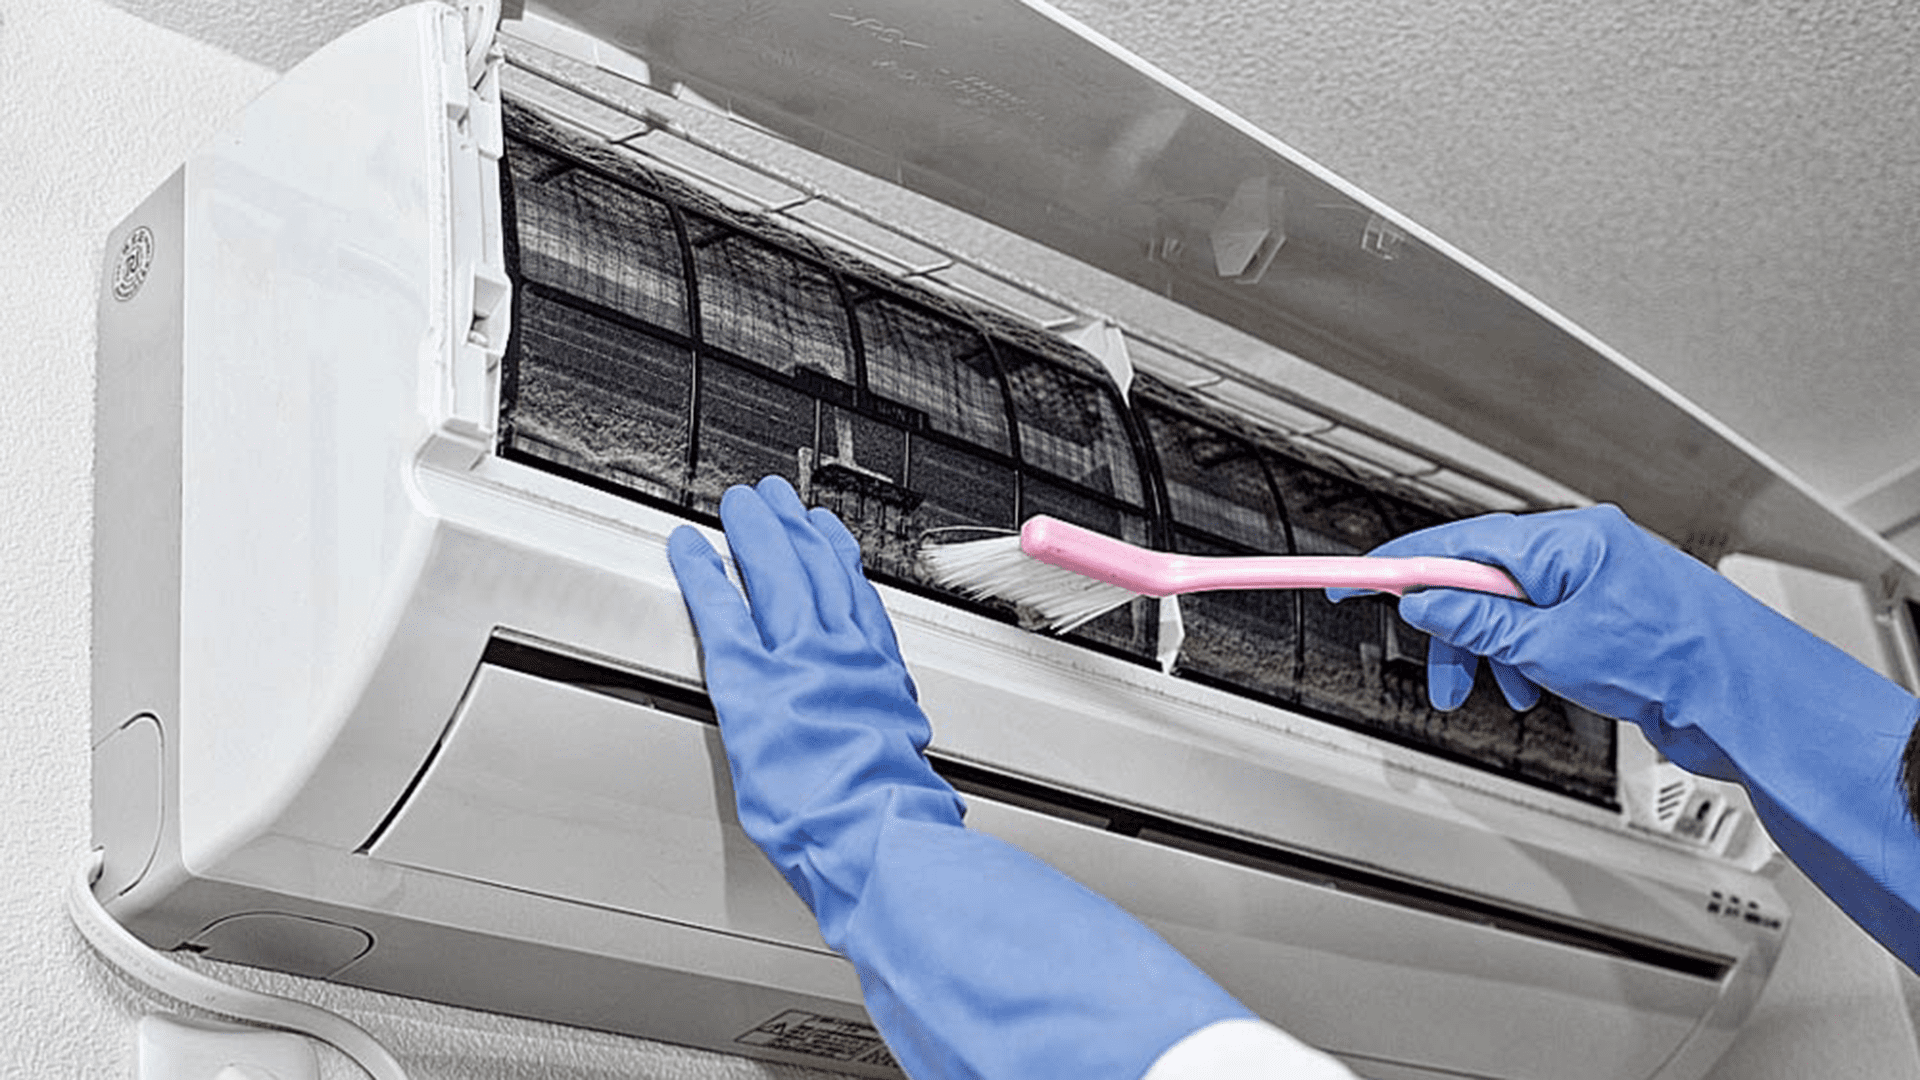 close shot of hands wearing blue gloves cleaning air conditioner's indoor unit air filters.